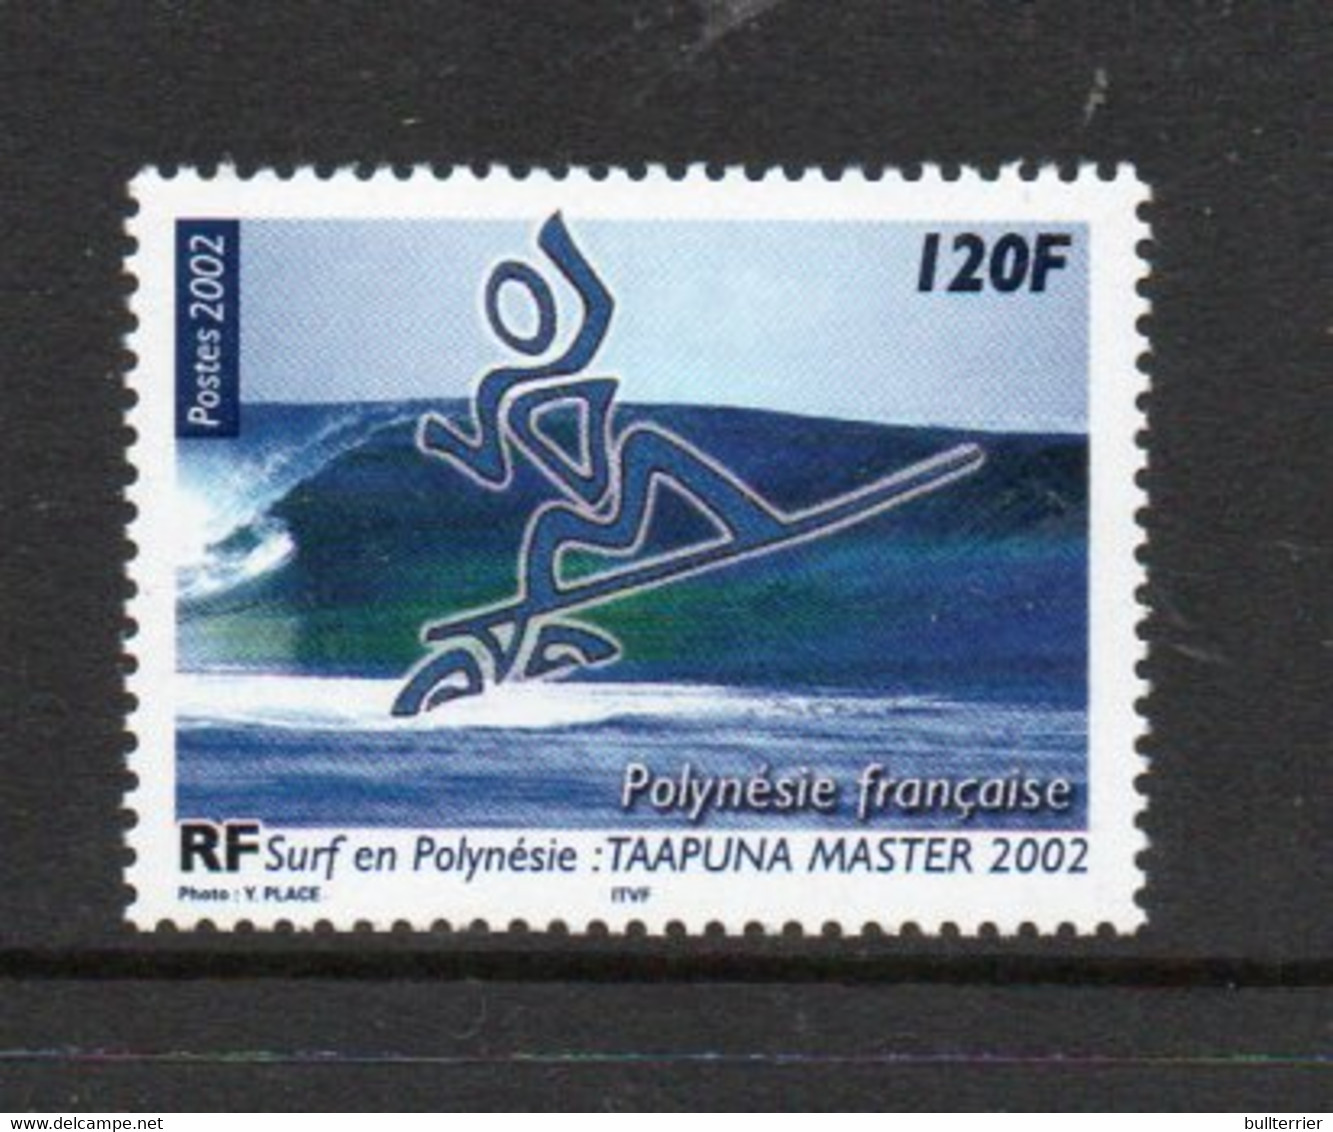 SURFING  - POLYNESIA - 2002 - SURFING  MINT NEVER HINGED - Water-skiing